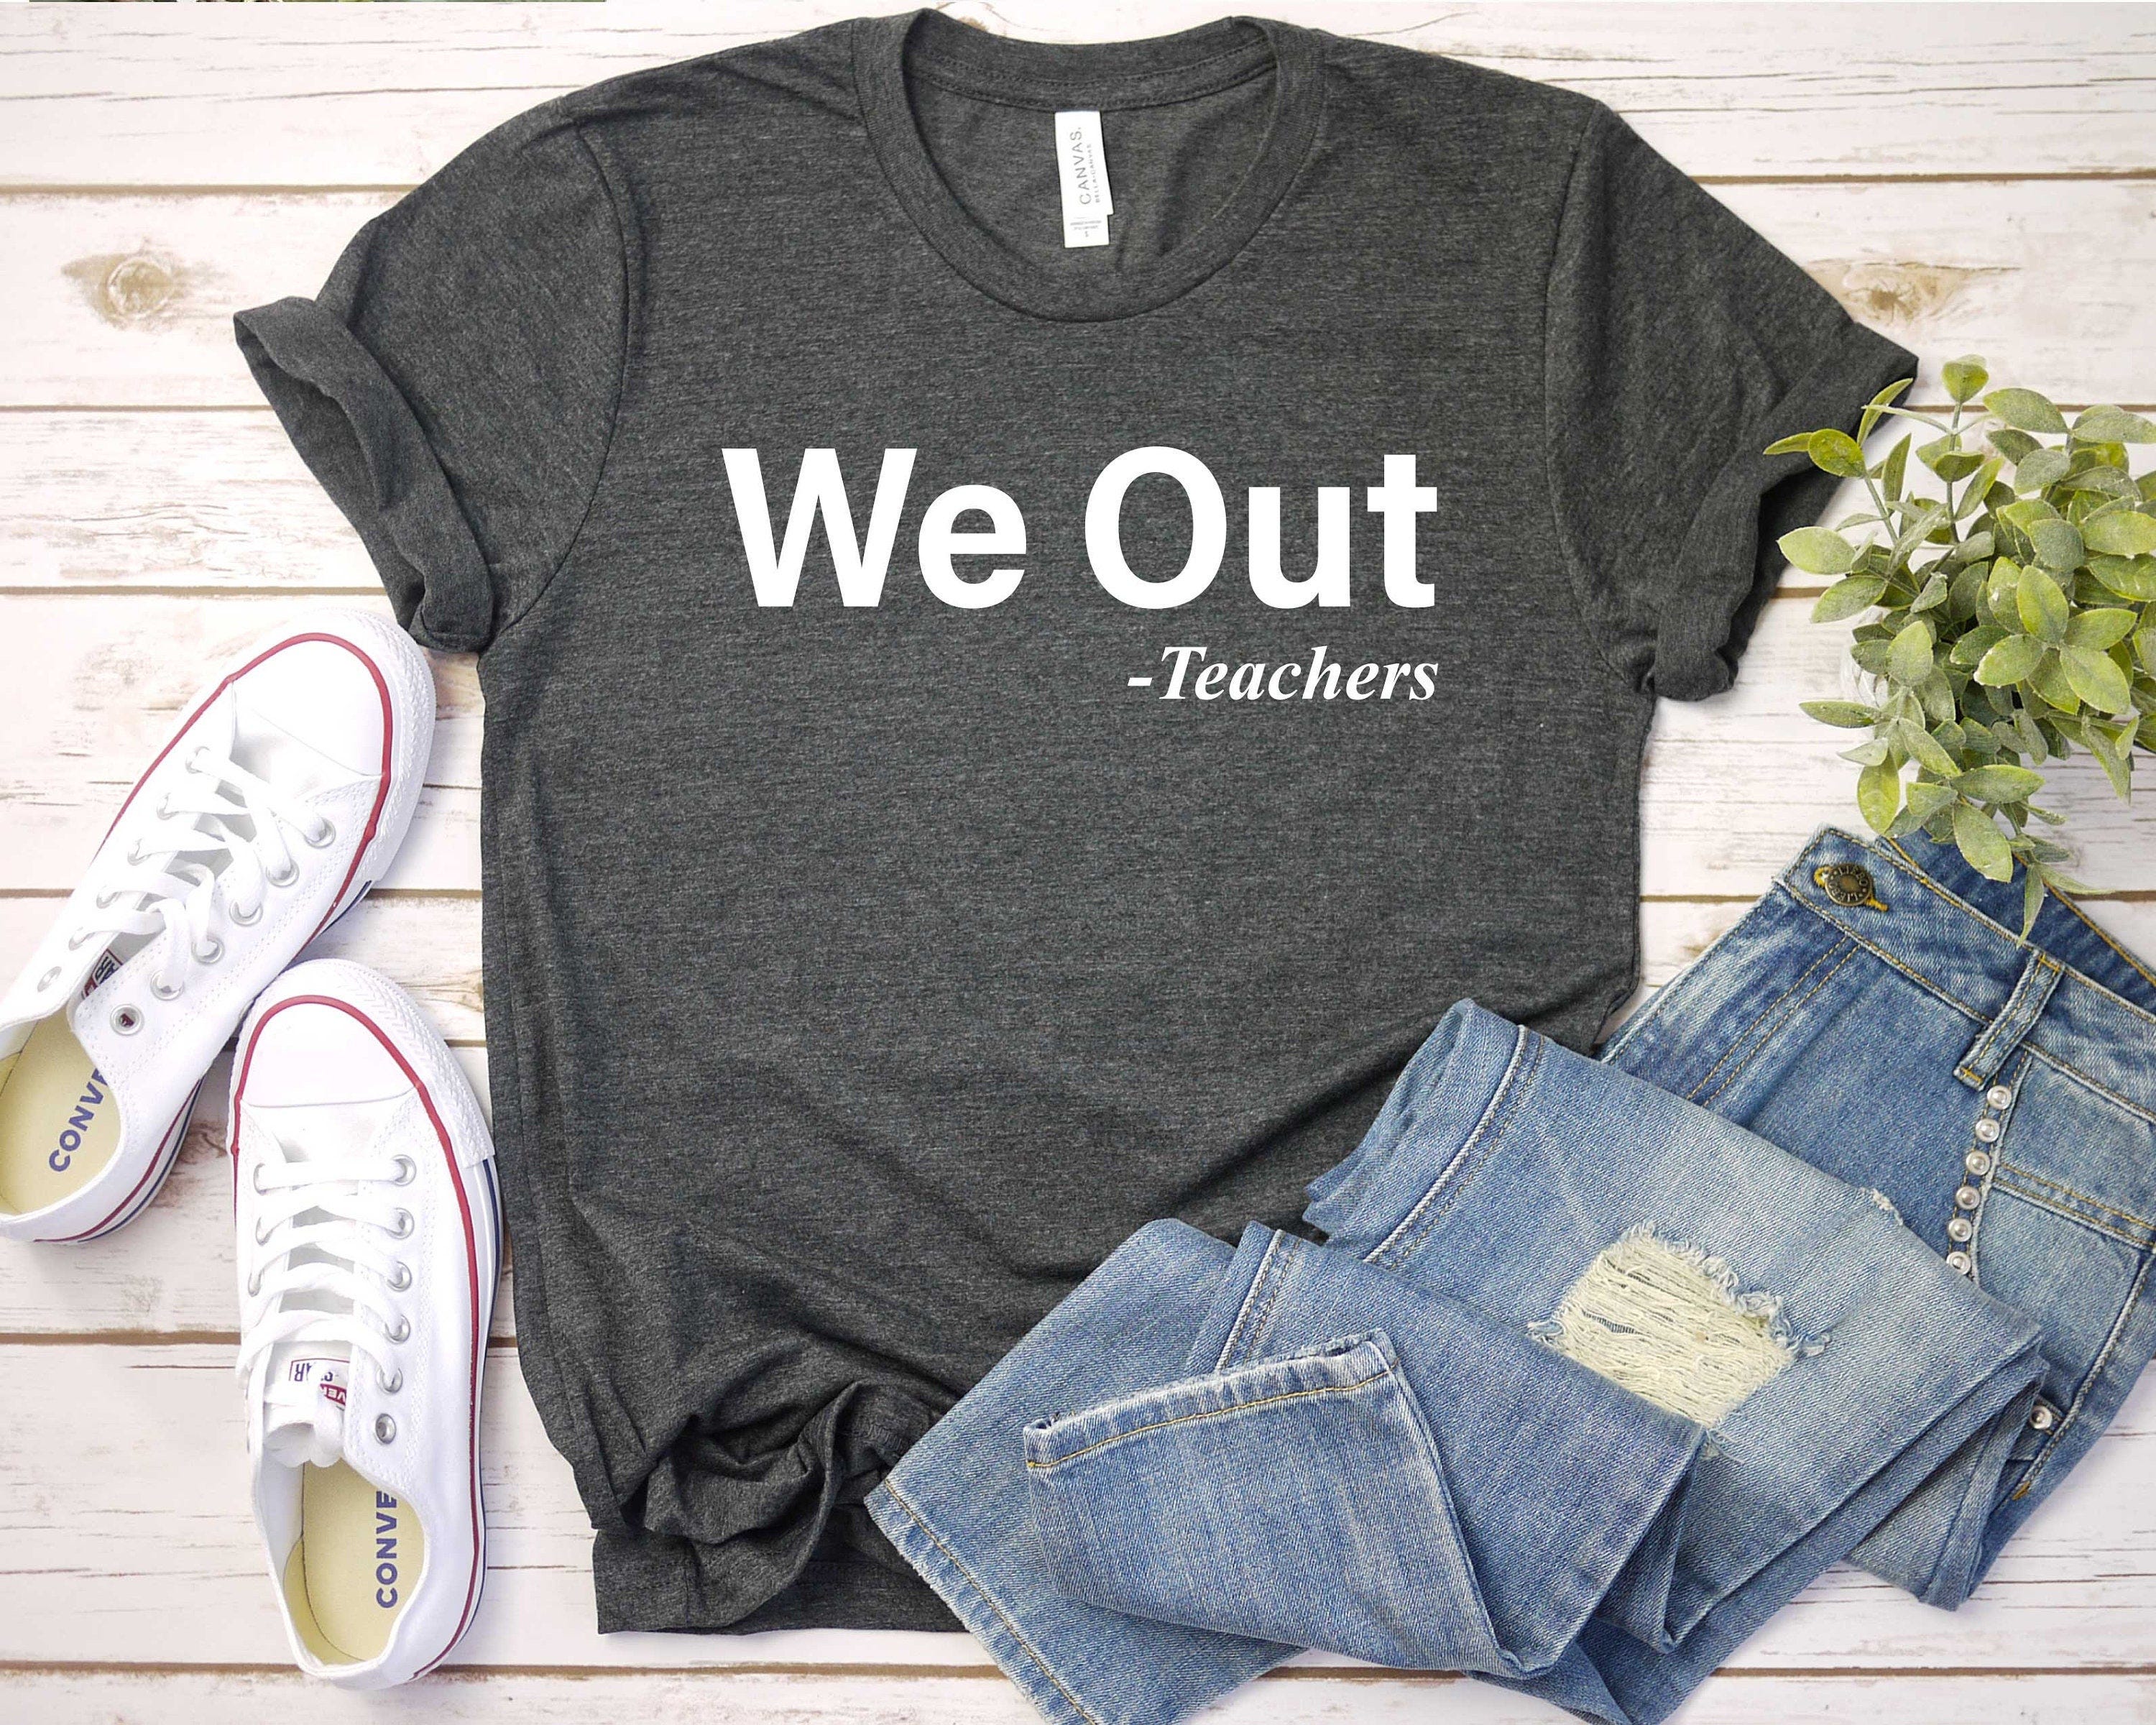 Funny Last Day of School Teacher Shirts, We Out Teacher Shirt, Last Day of School T-shirt, Matching End of School Year Teacher Gift GBD1980